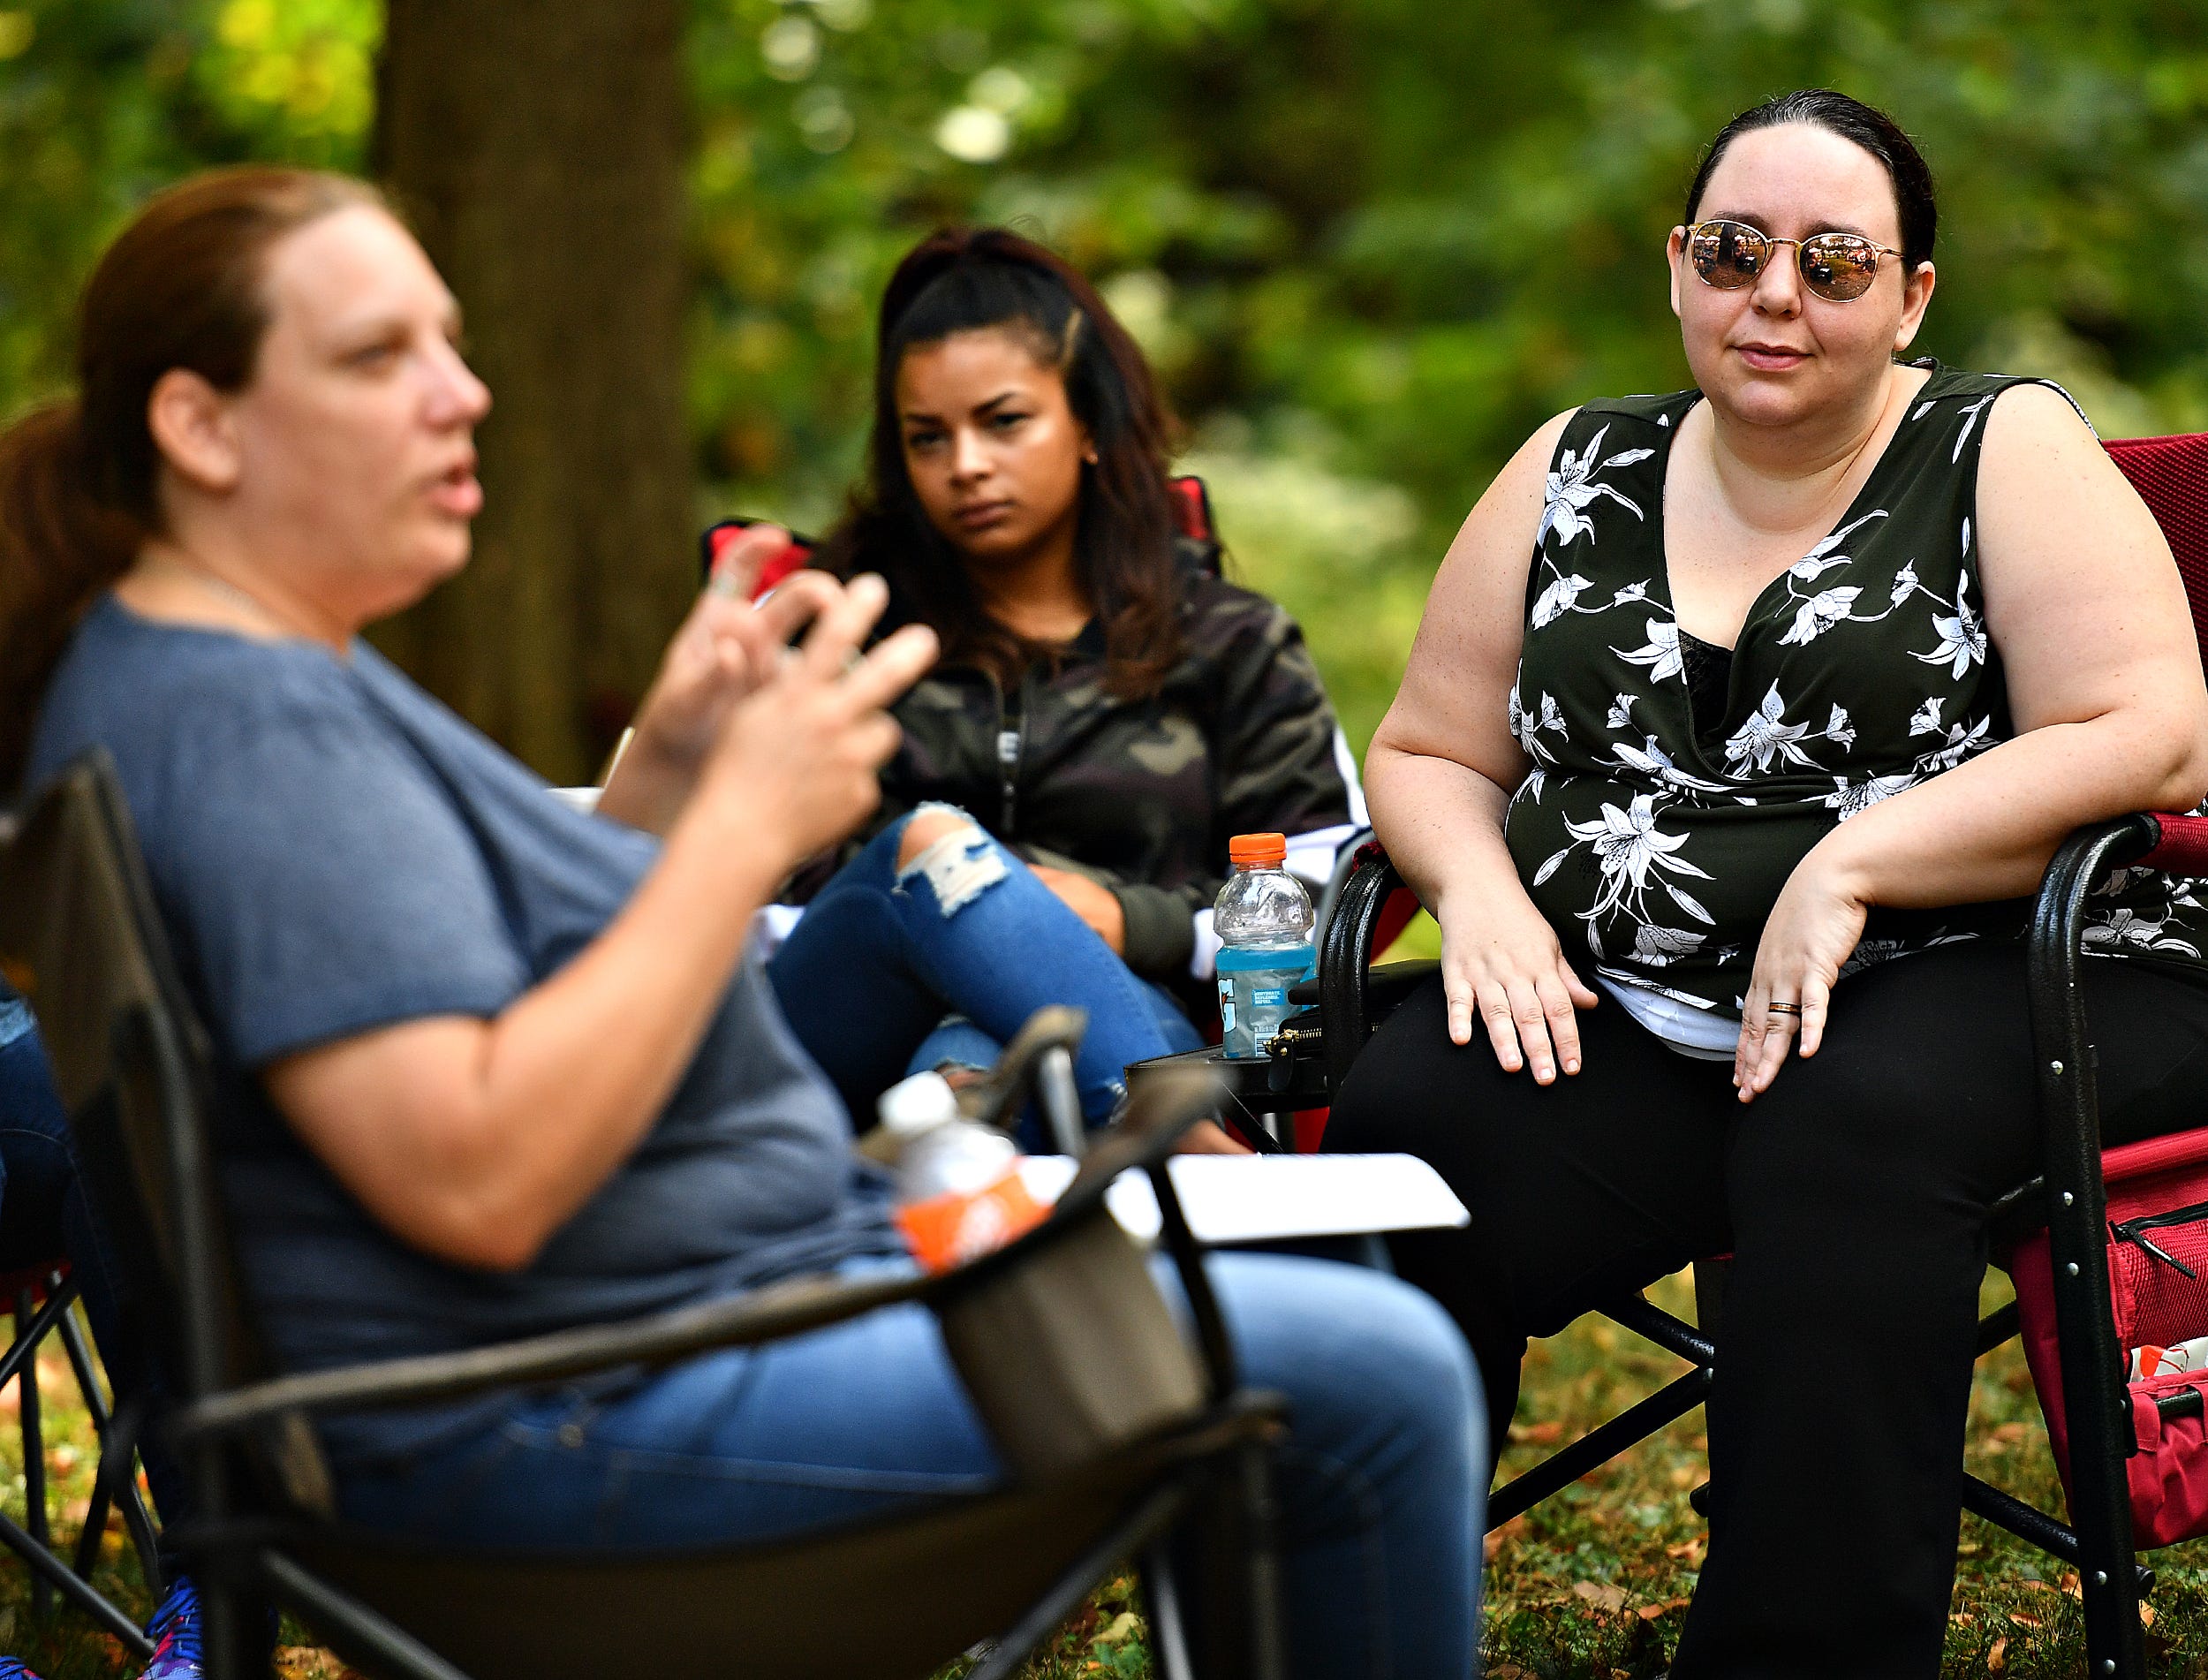 Water in folk magic is discussed in a workshop during the 8th annual Pagan Pride Festival at Samuel S. Lewis State Park in Lower Windsor Township, Saturday, Sept. 28, 2019. Dawn J. Sagert photo